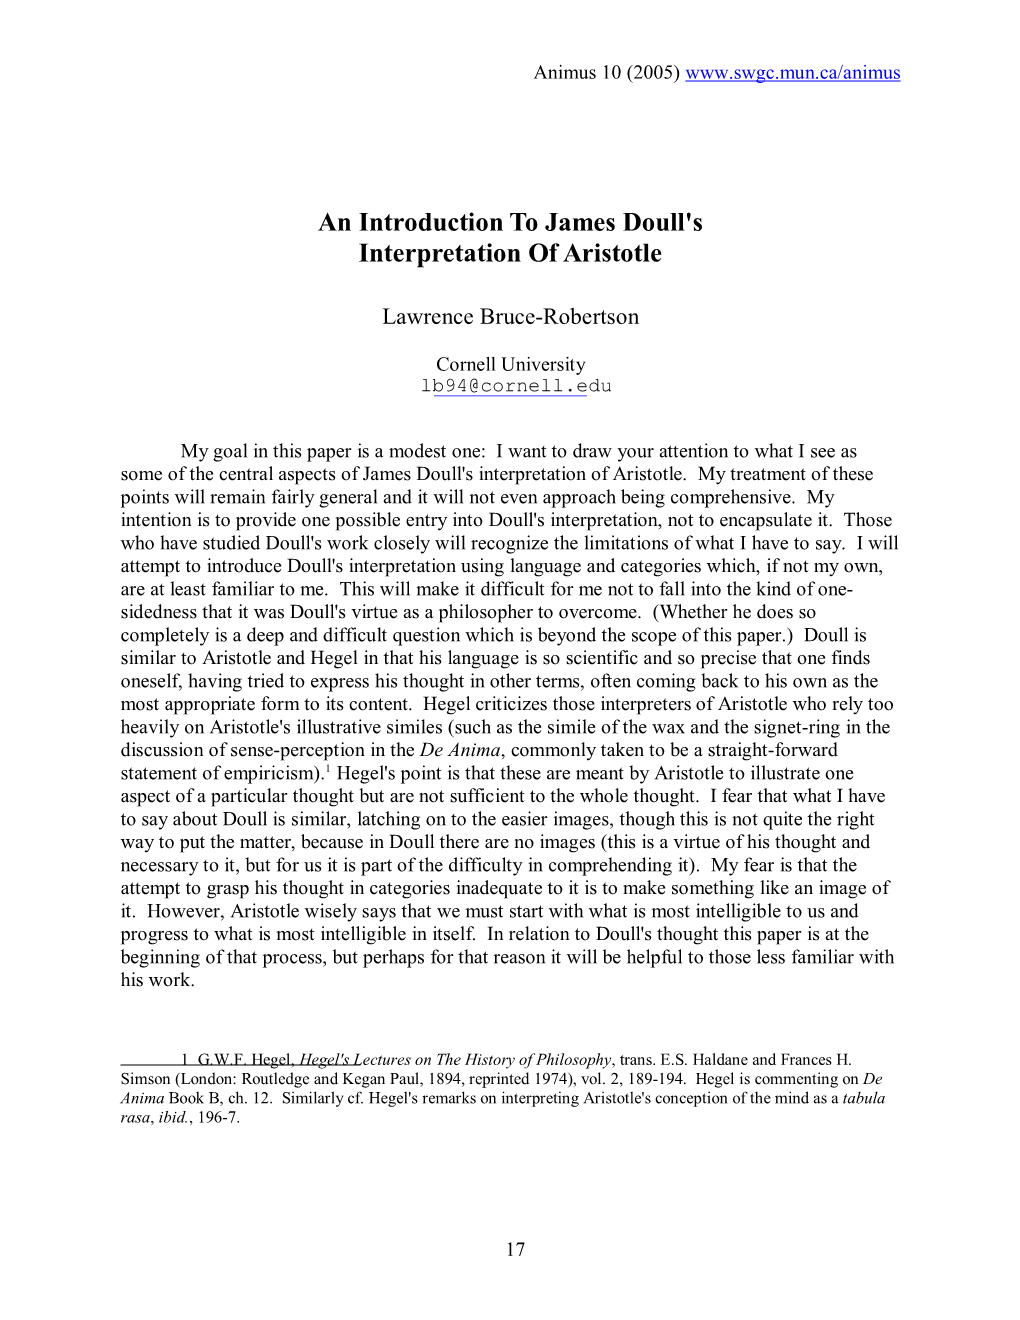 An Introduction to James Doull's Interpretation of Aristotle